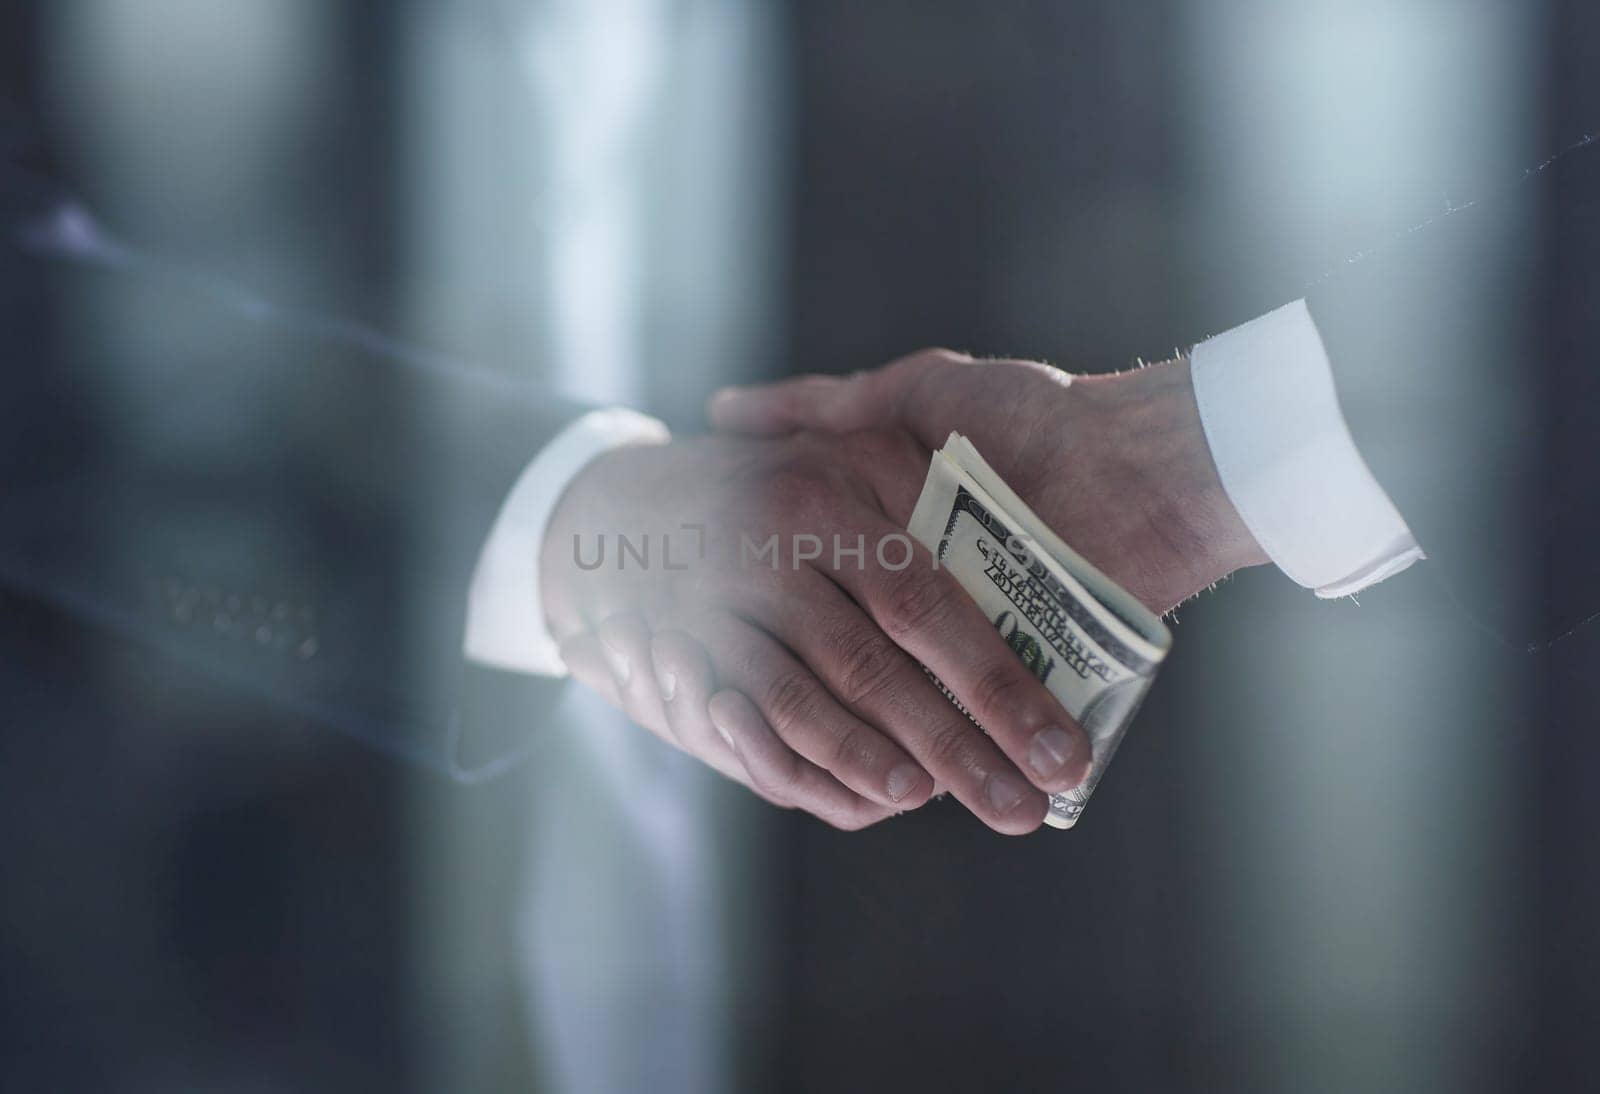 Handshake with the transfer of money on a black background